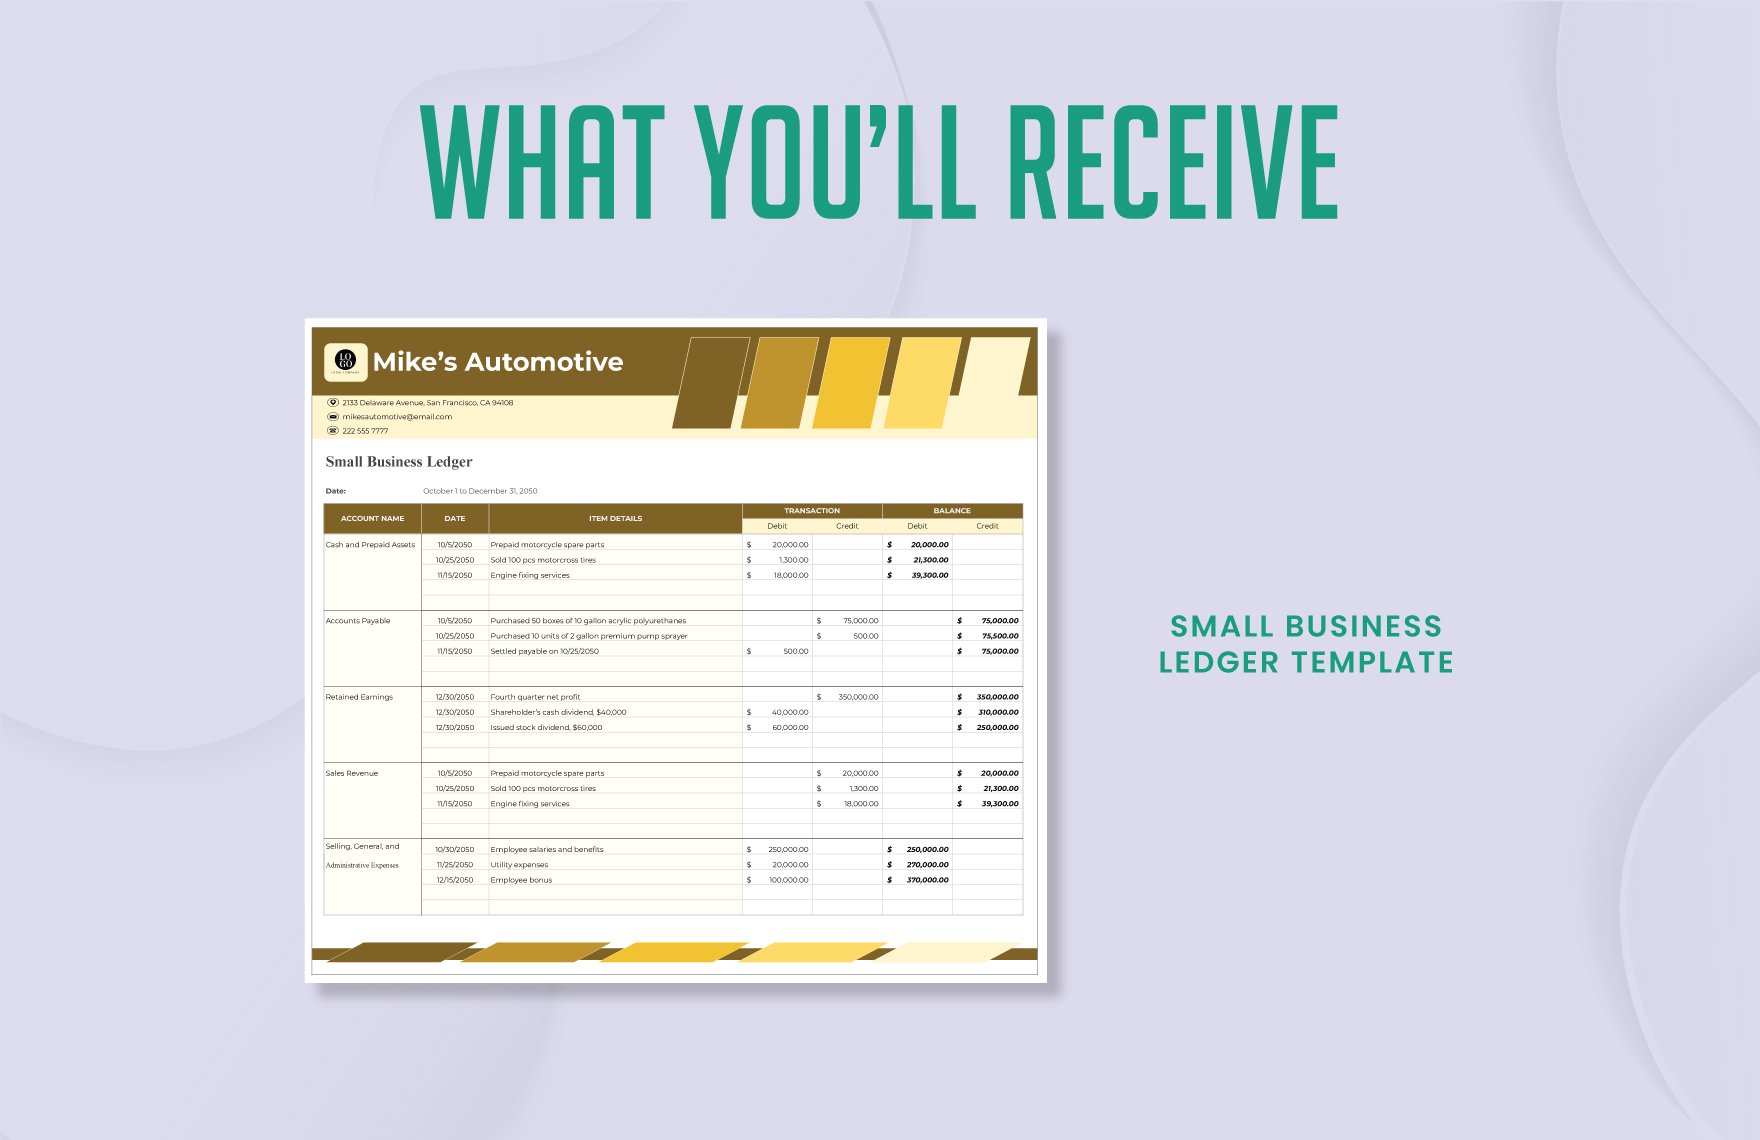 Small Business Ledger Template